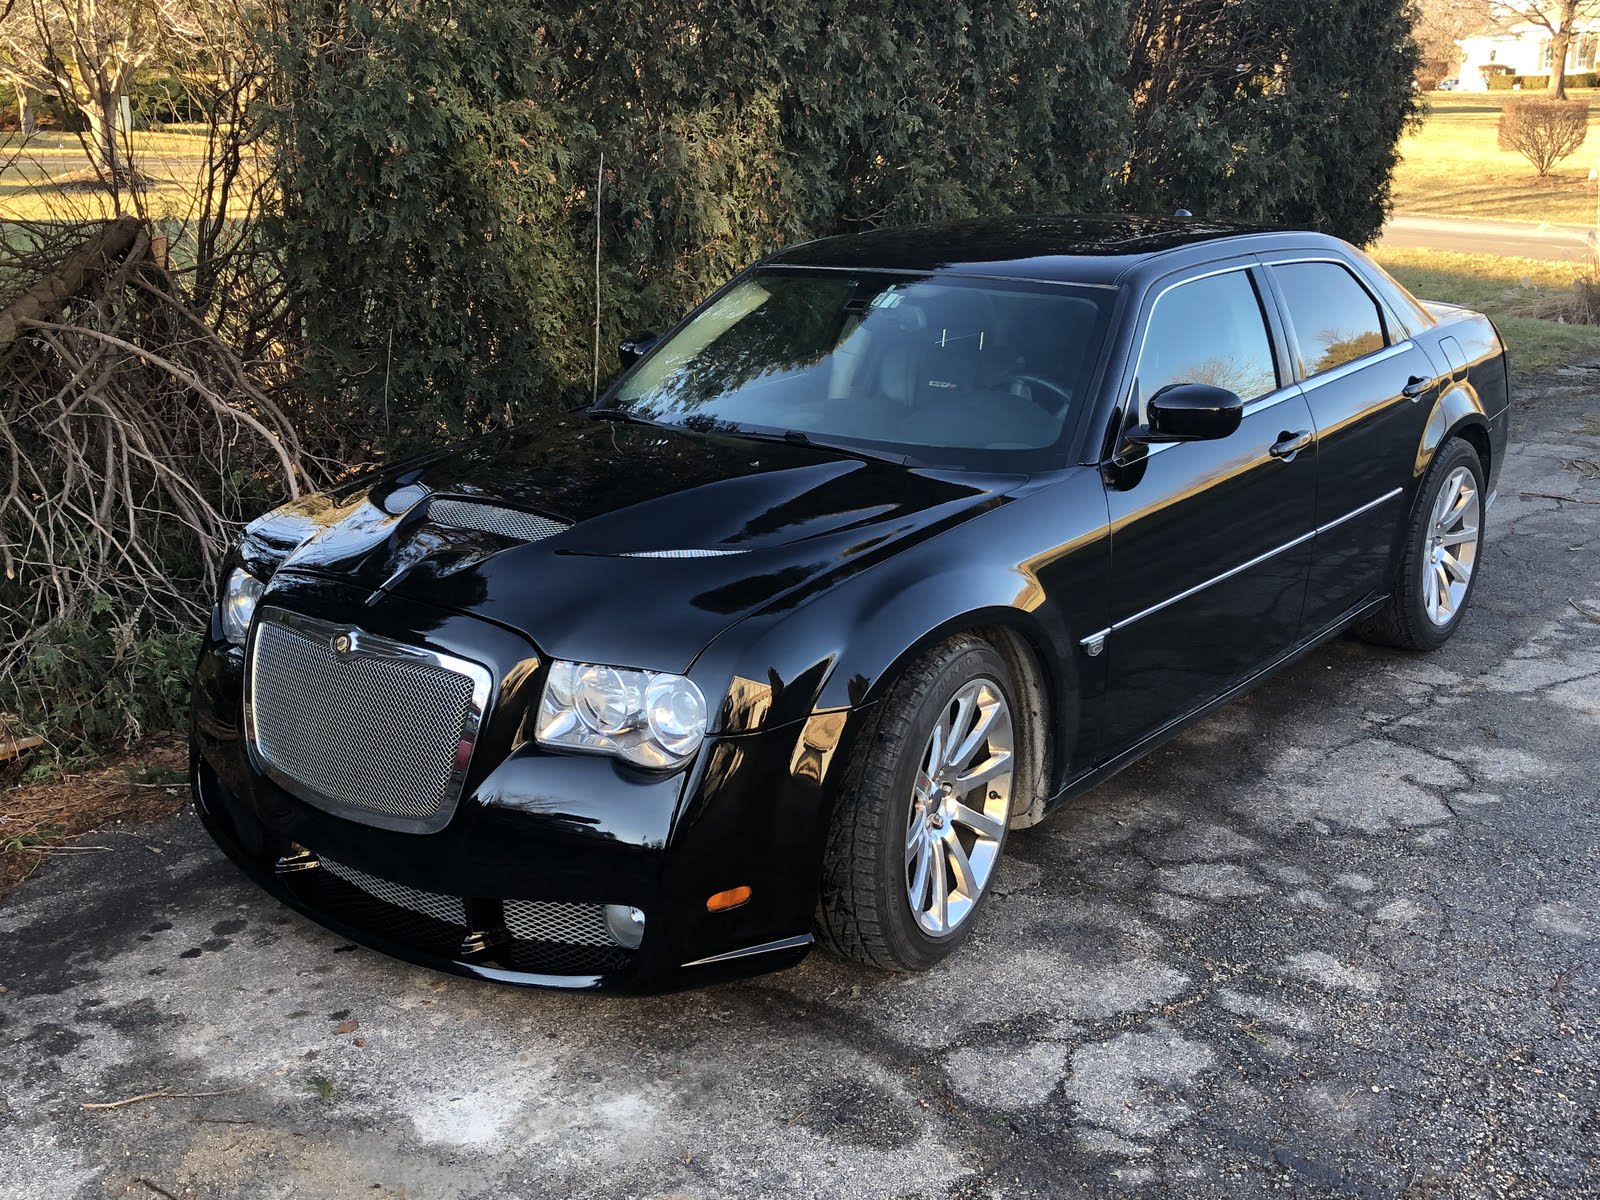 Chrysler 300 Questions Is There A Kit For The Old Body Chrysler 300 Front End To Make It Look Cargurus